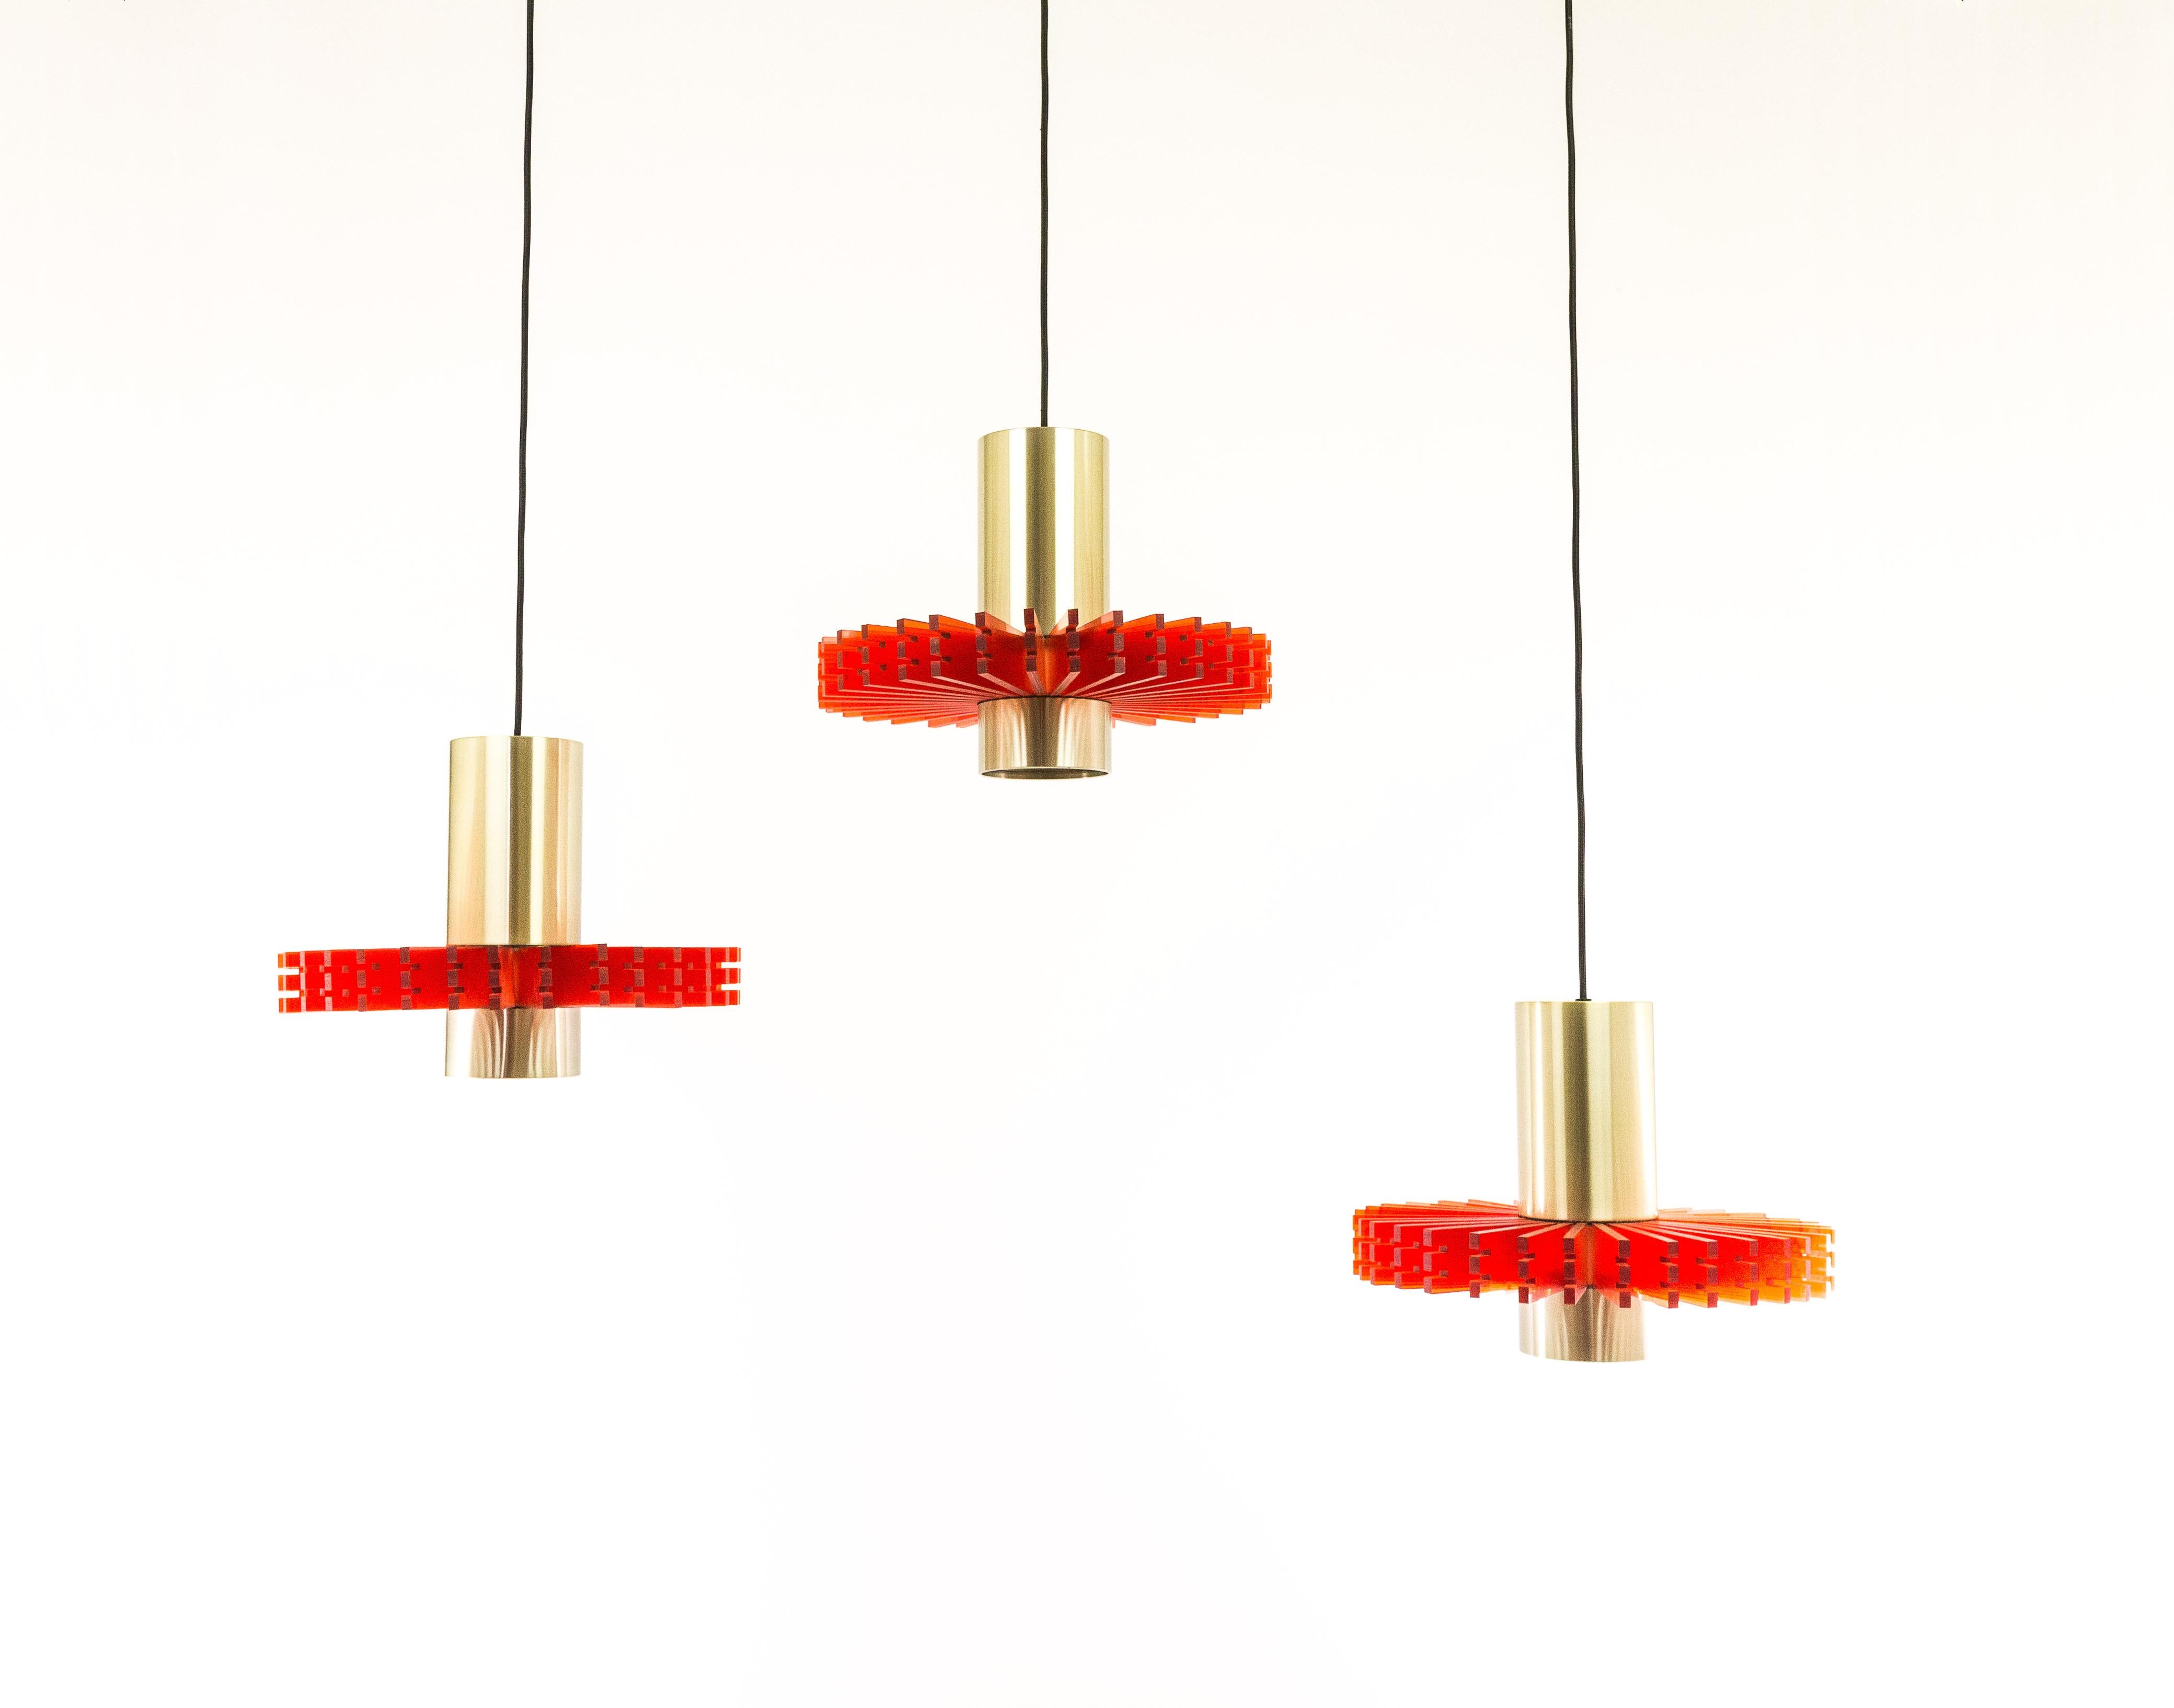 Set of three aluminium and acrylic pendants, nicknamed 'Priest collar', designed by Claus Bolby for Danish lighting manufacturer Cebo in -most probably- the 1960s.

Each pendant consists of two round brass colored aluminium elements which are